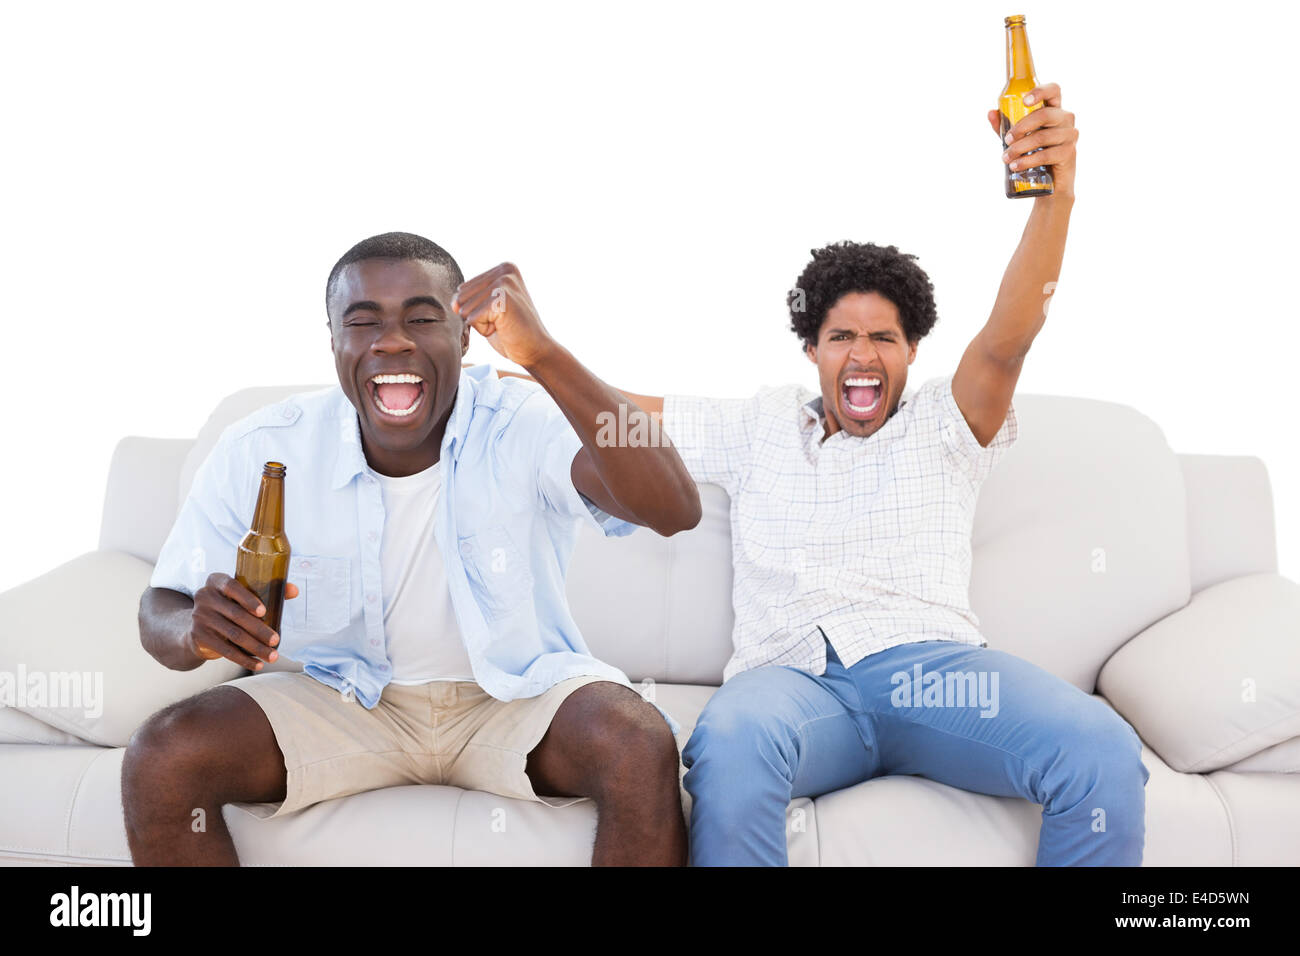 Ecstatic sports fans sitting on the couch with beers Stock Photo